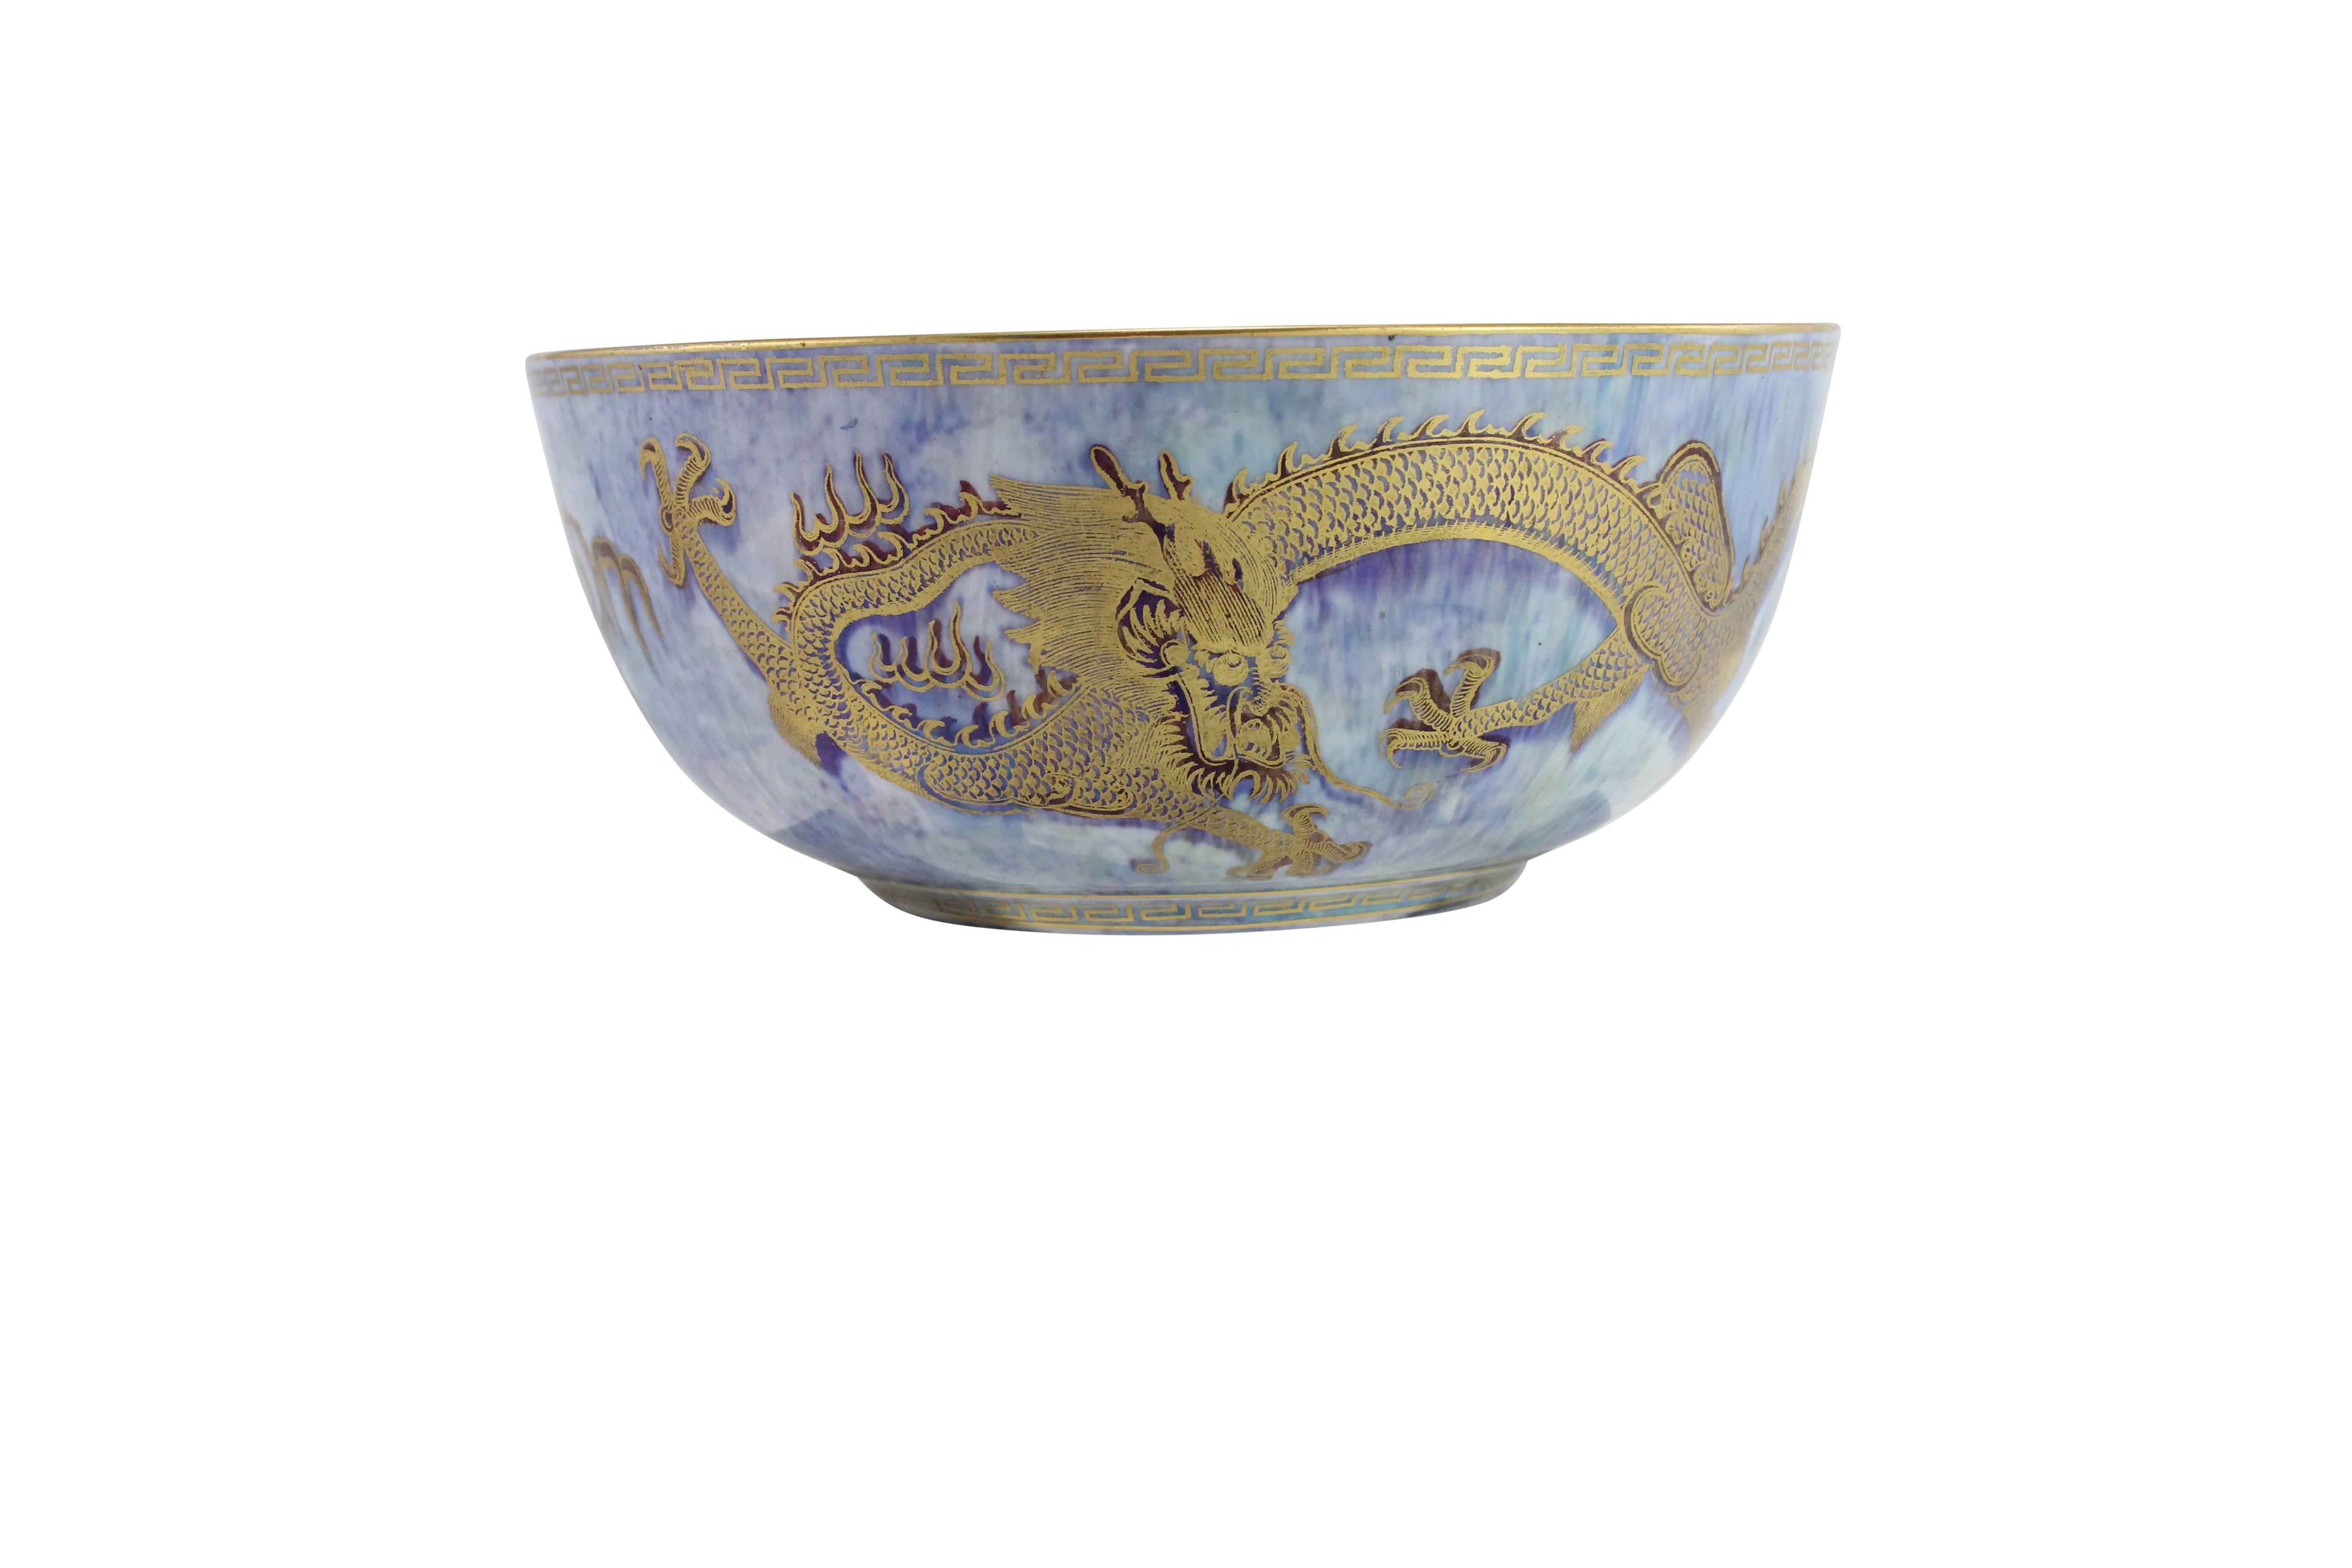 20th Century 'Mythical Creatures' Series Lustreware Bowl by Wedgwood